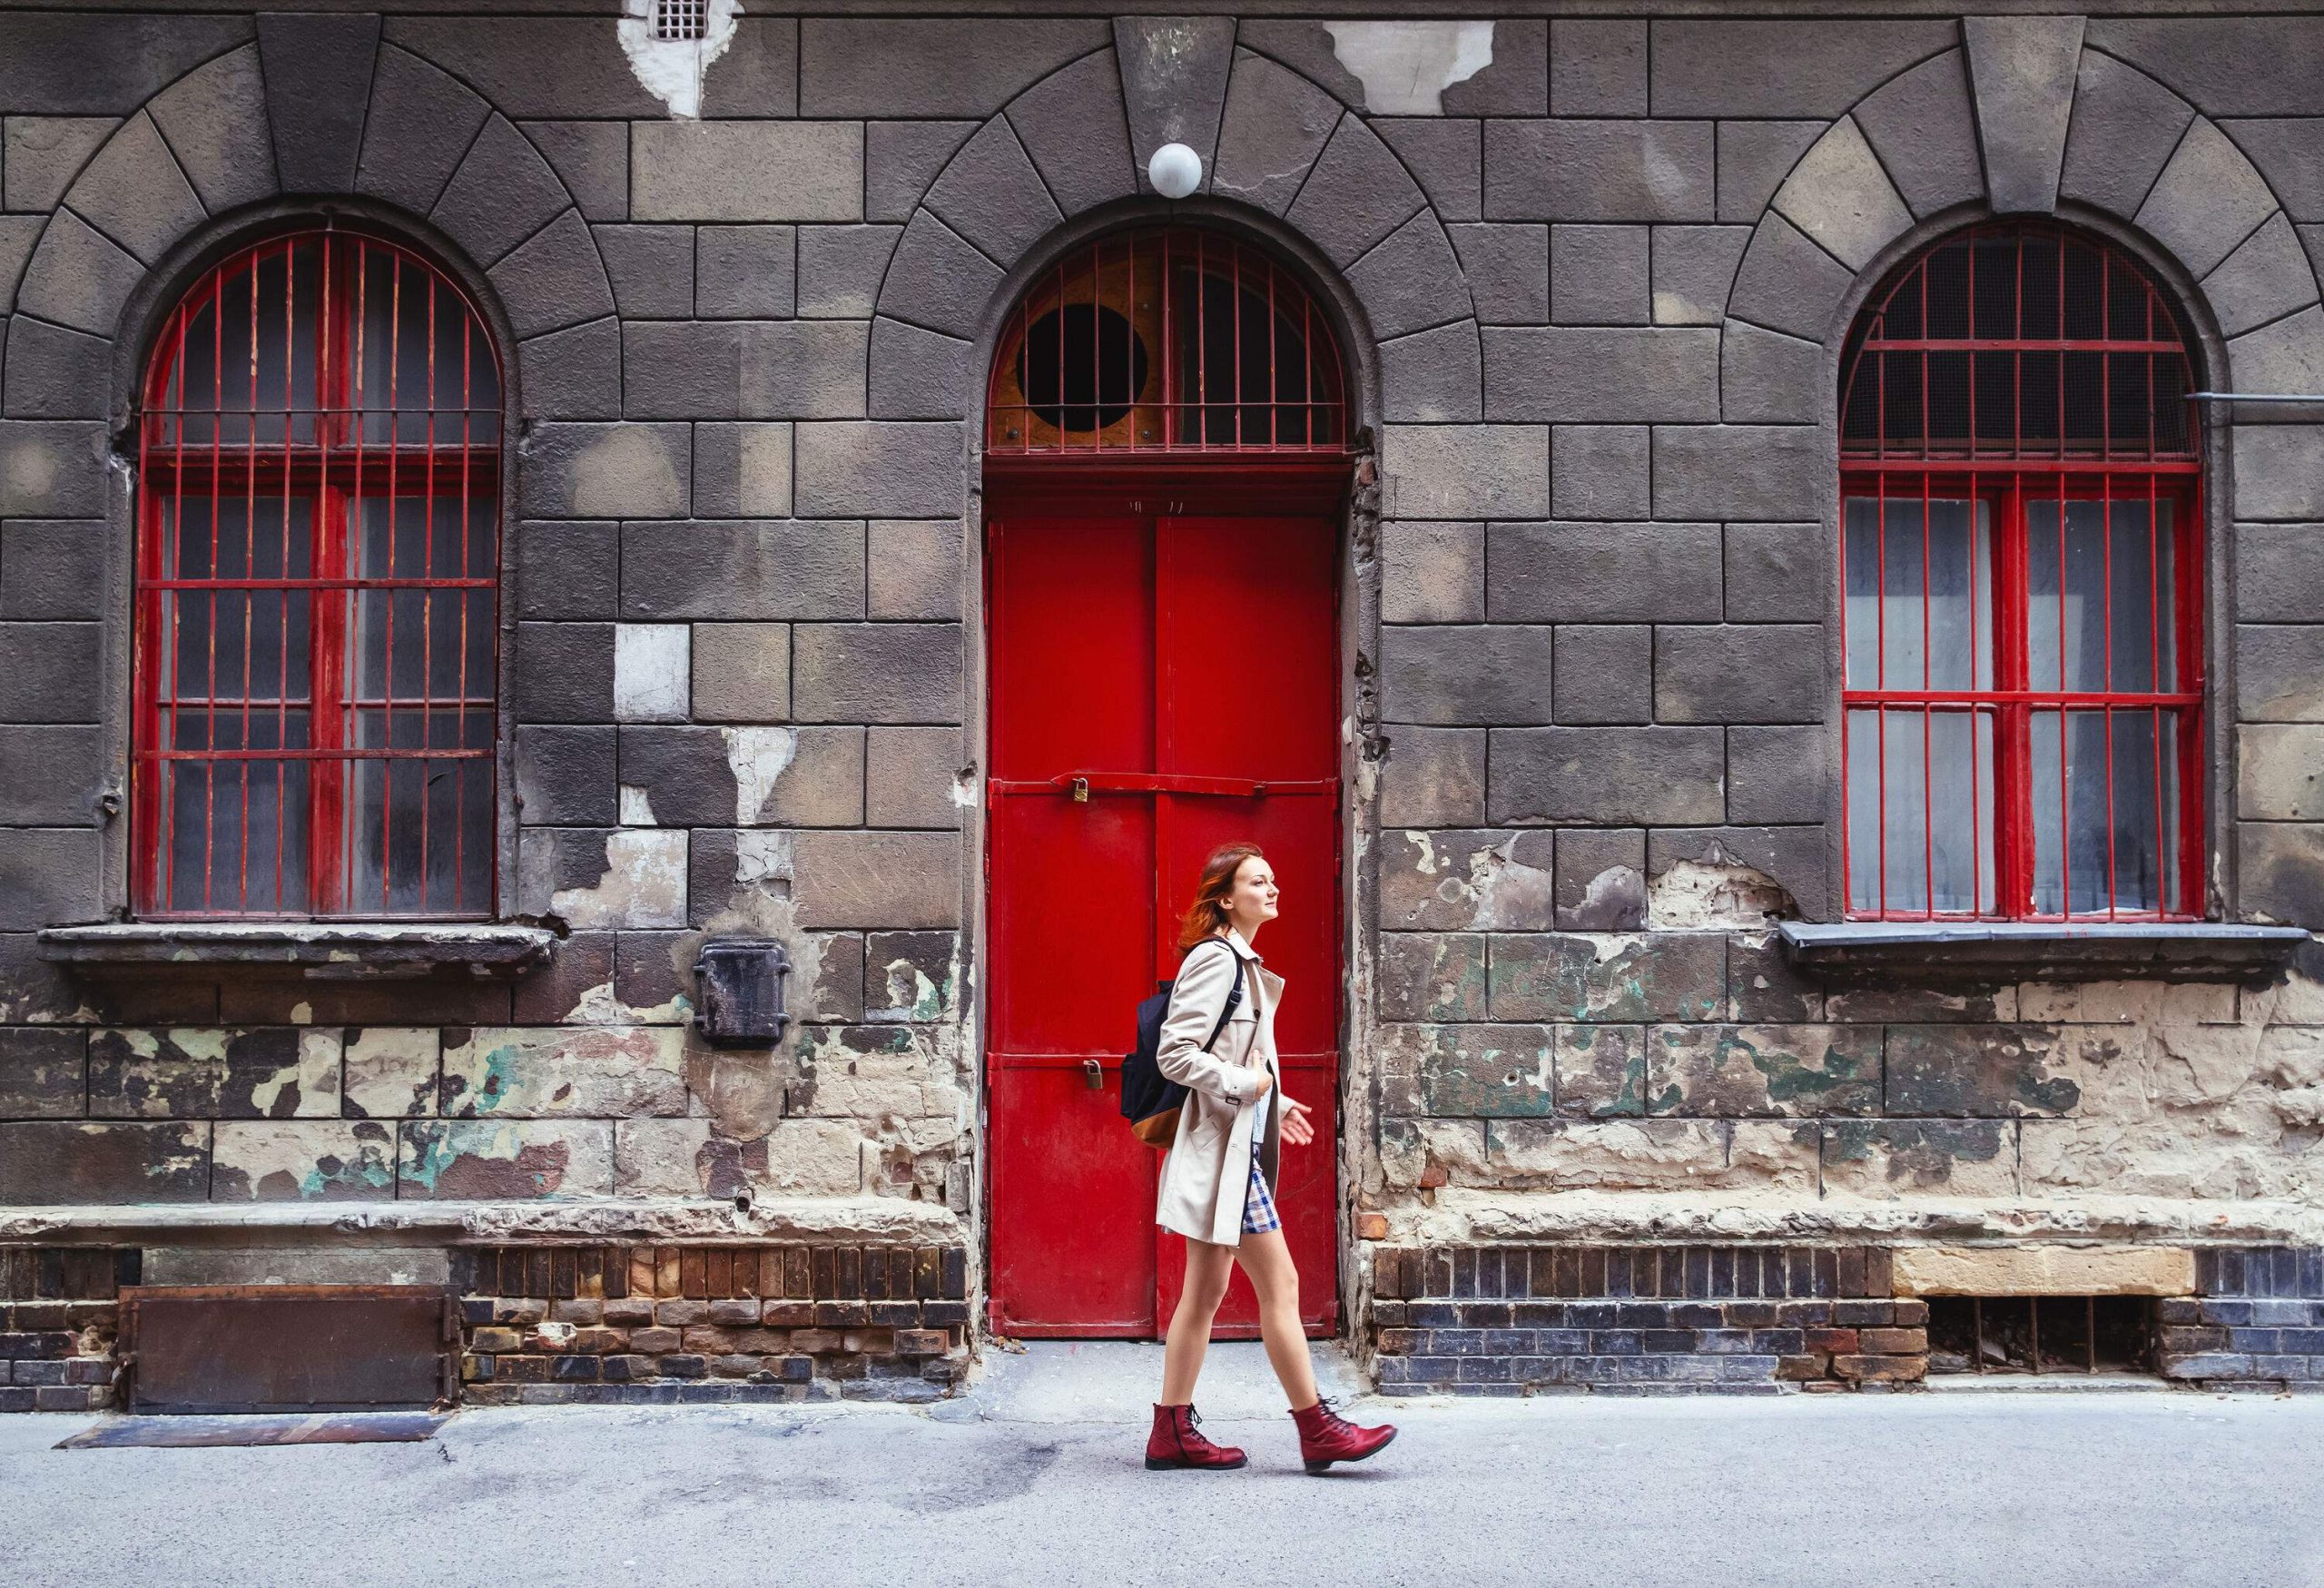 Young lady walking on a sidewalk next to a building with a red door.